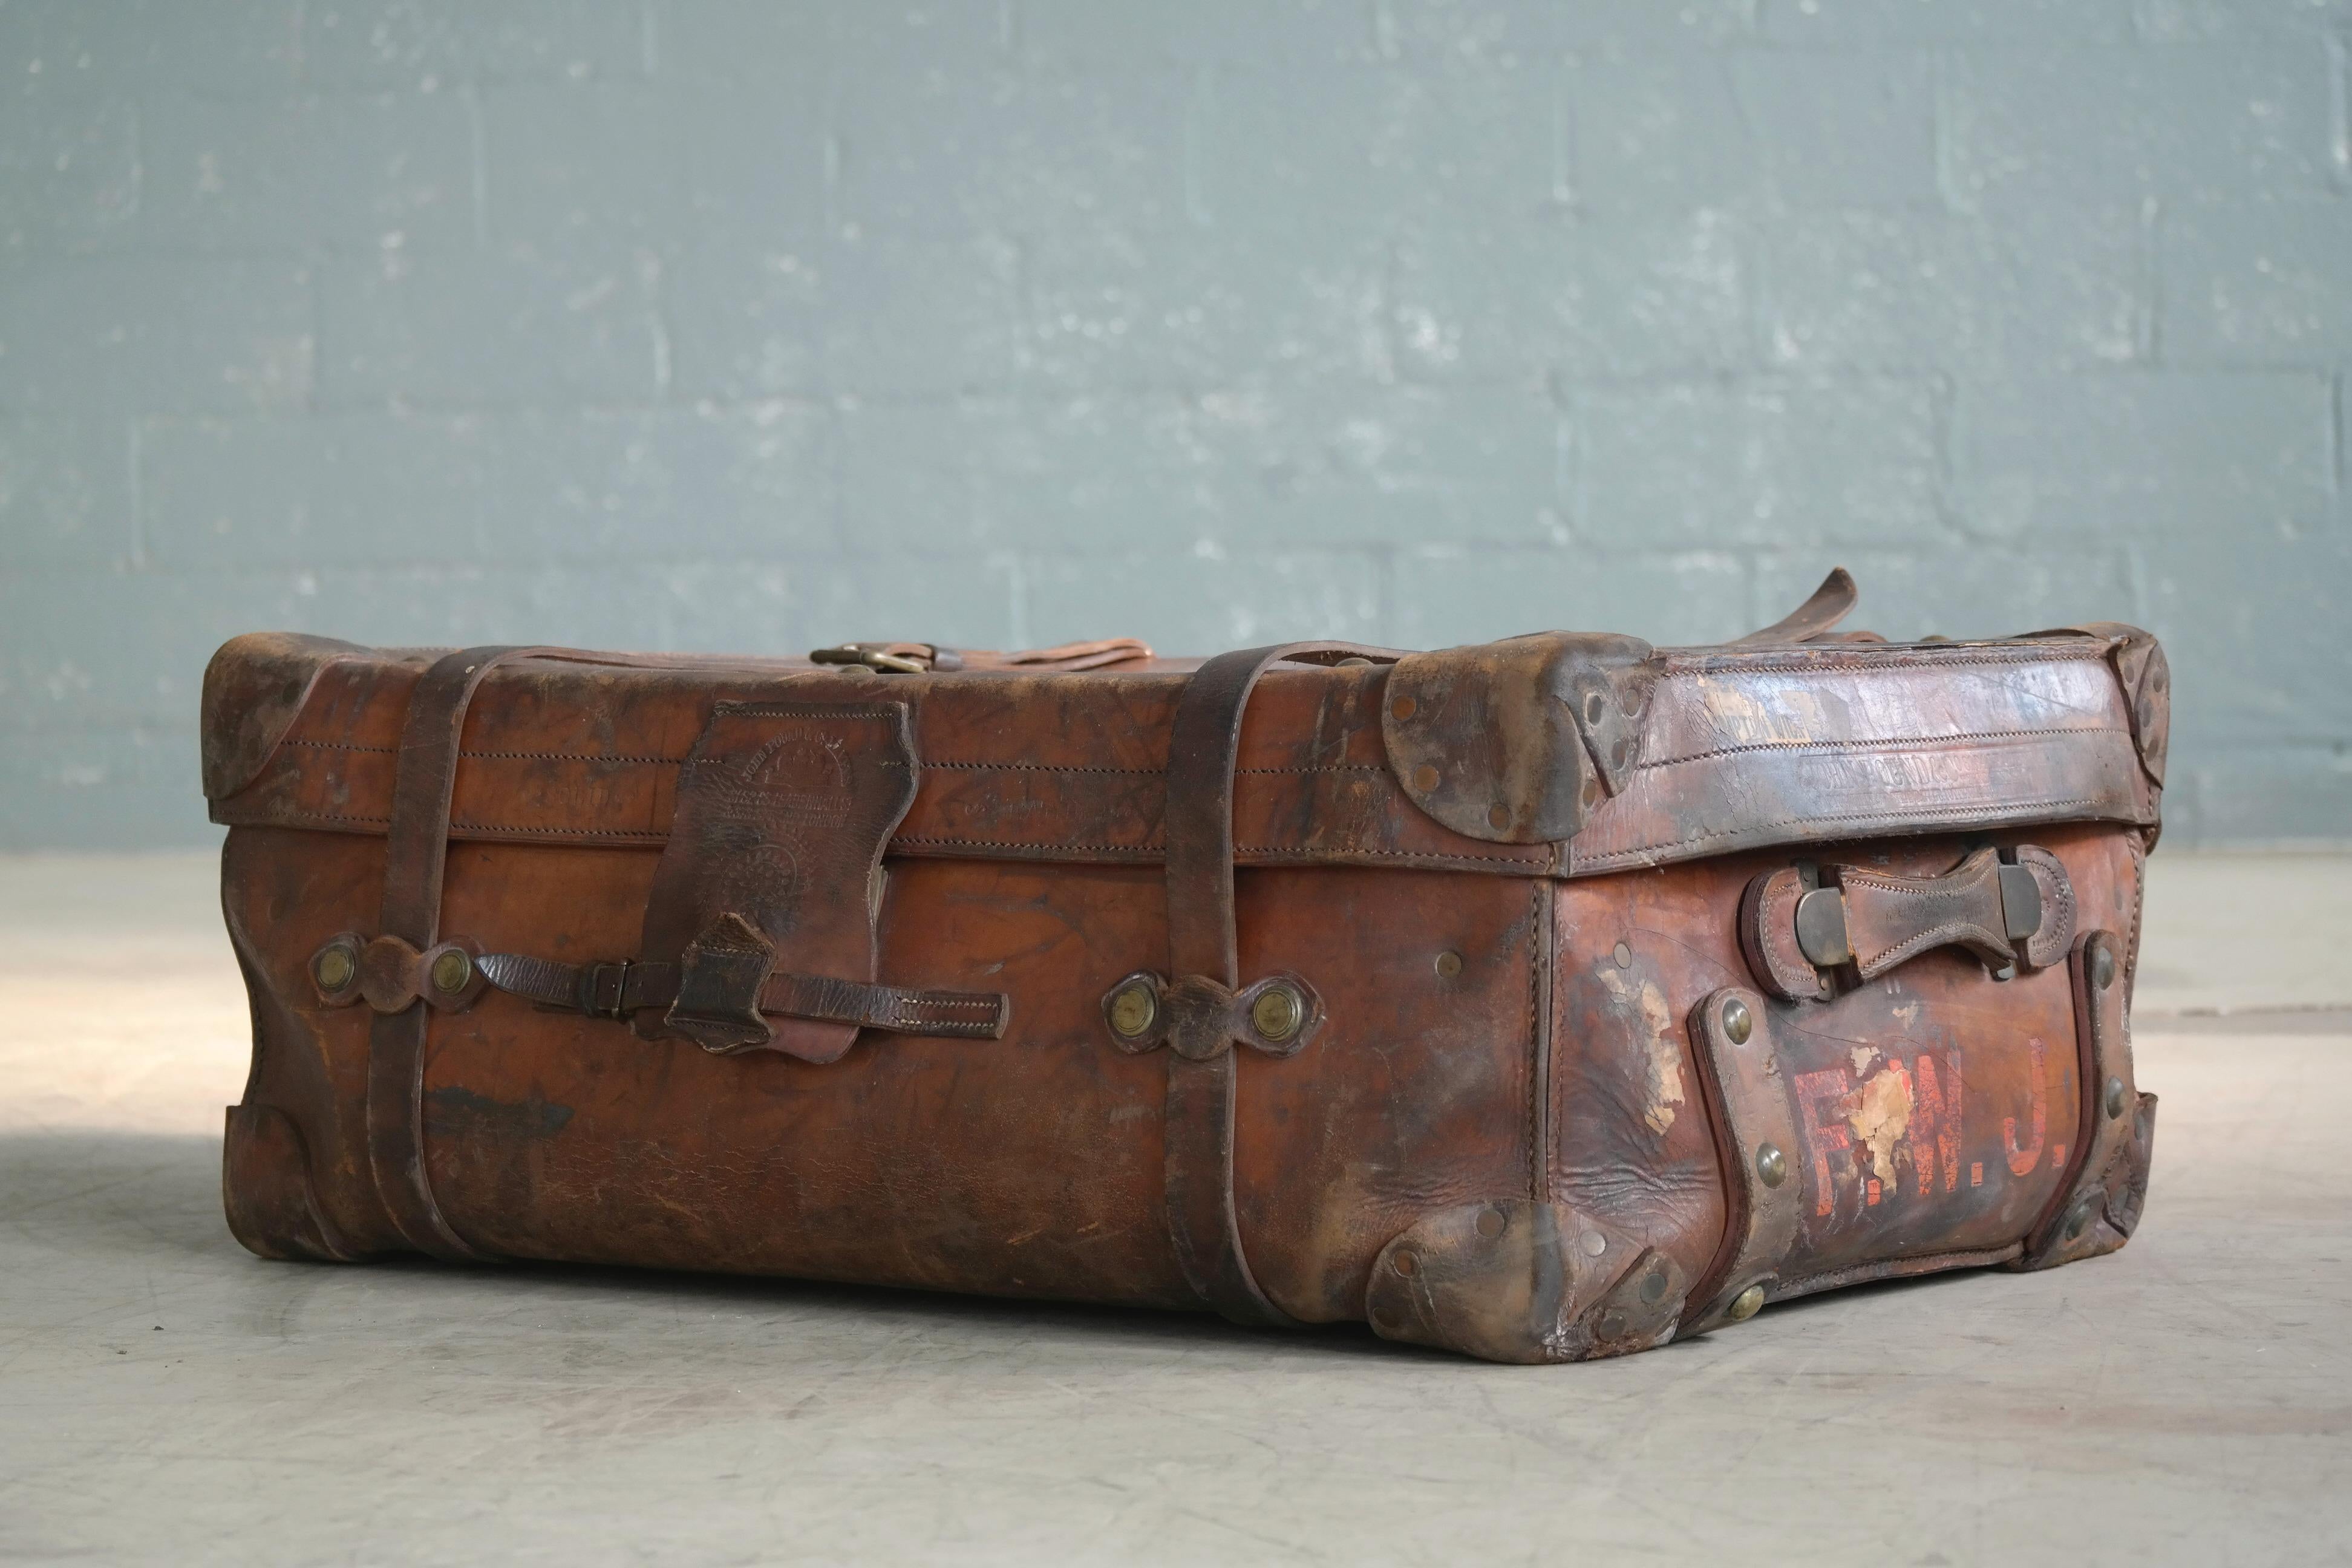 If suitcases could speak and while this fantastic English leather steamer trunk may not speak it does tell quite a story of splendid travel and adventure and the feat of surviving it all including two world wars. Made circa 1883 by legendary John